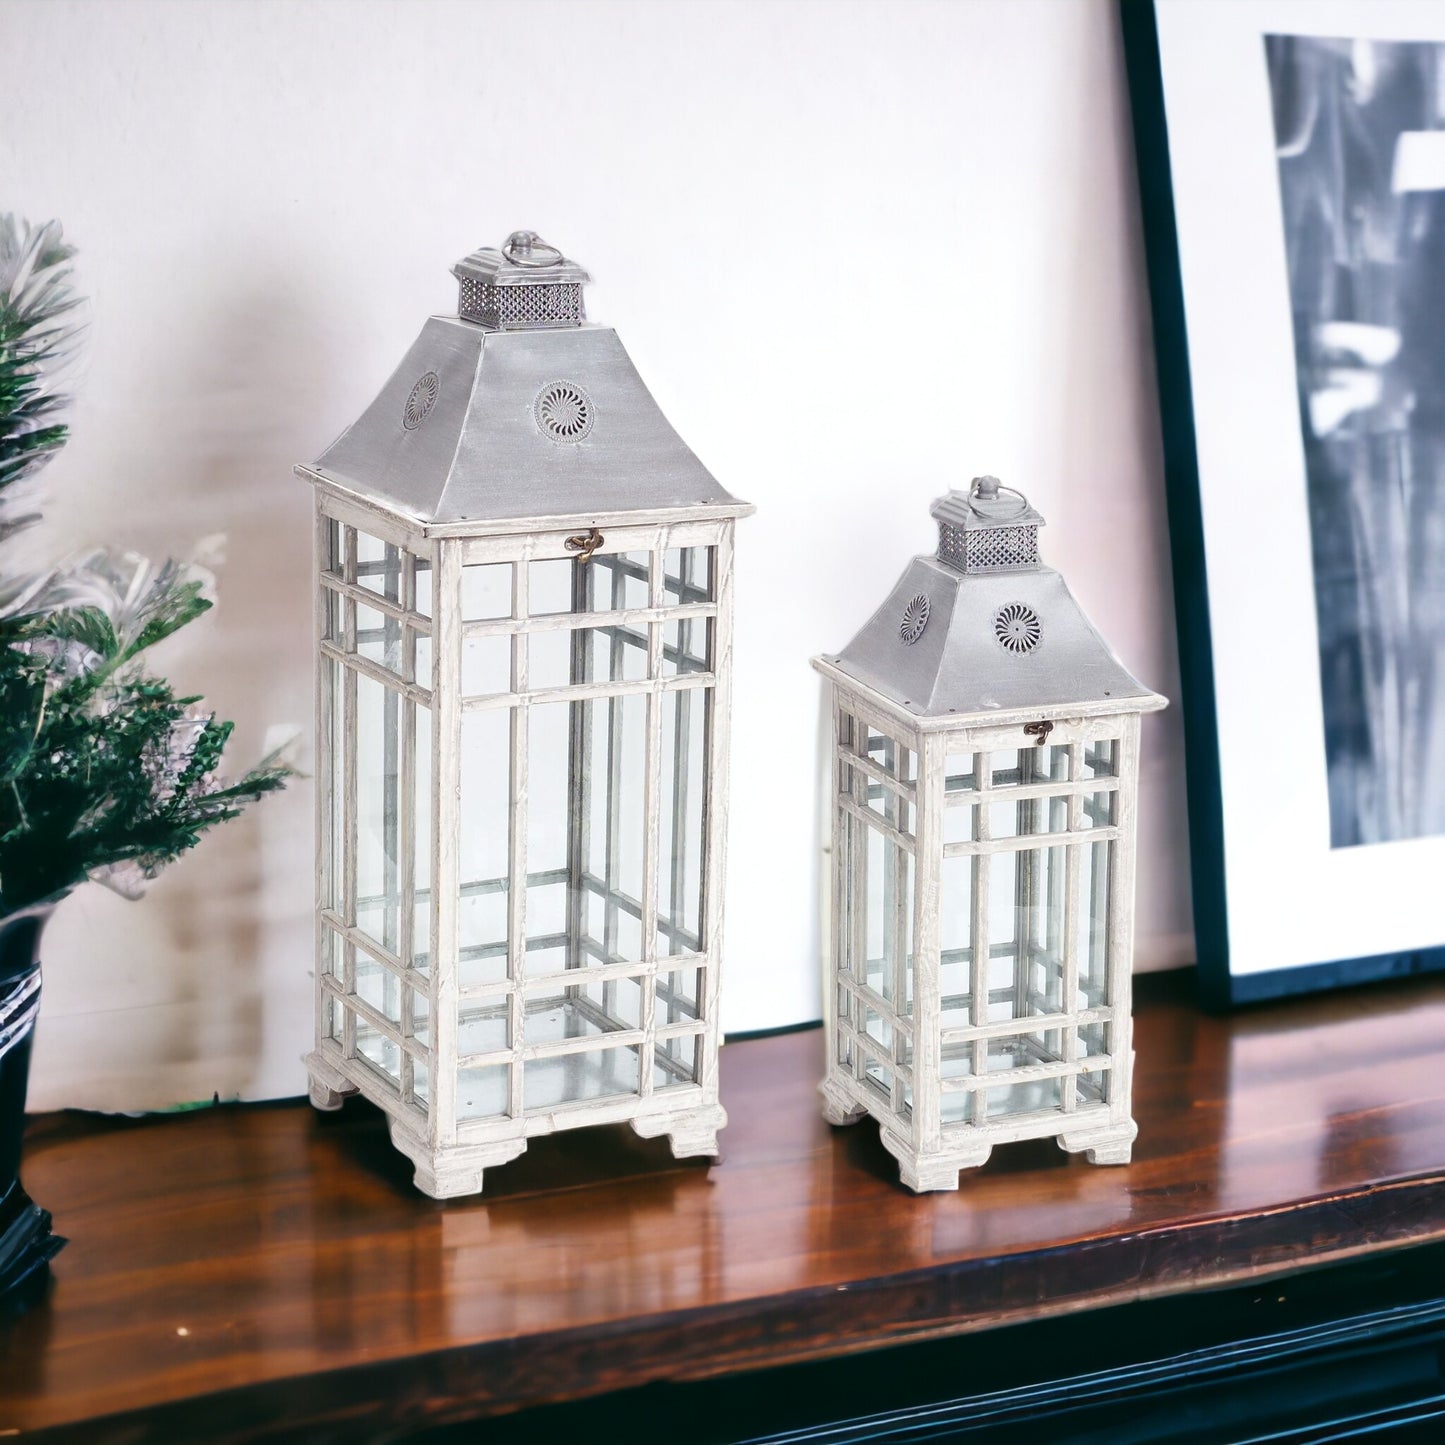 Set Of Two Gray Flameless Floor Lantern Candle Holders